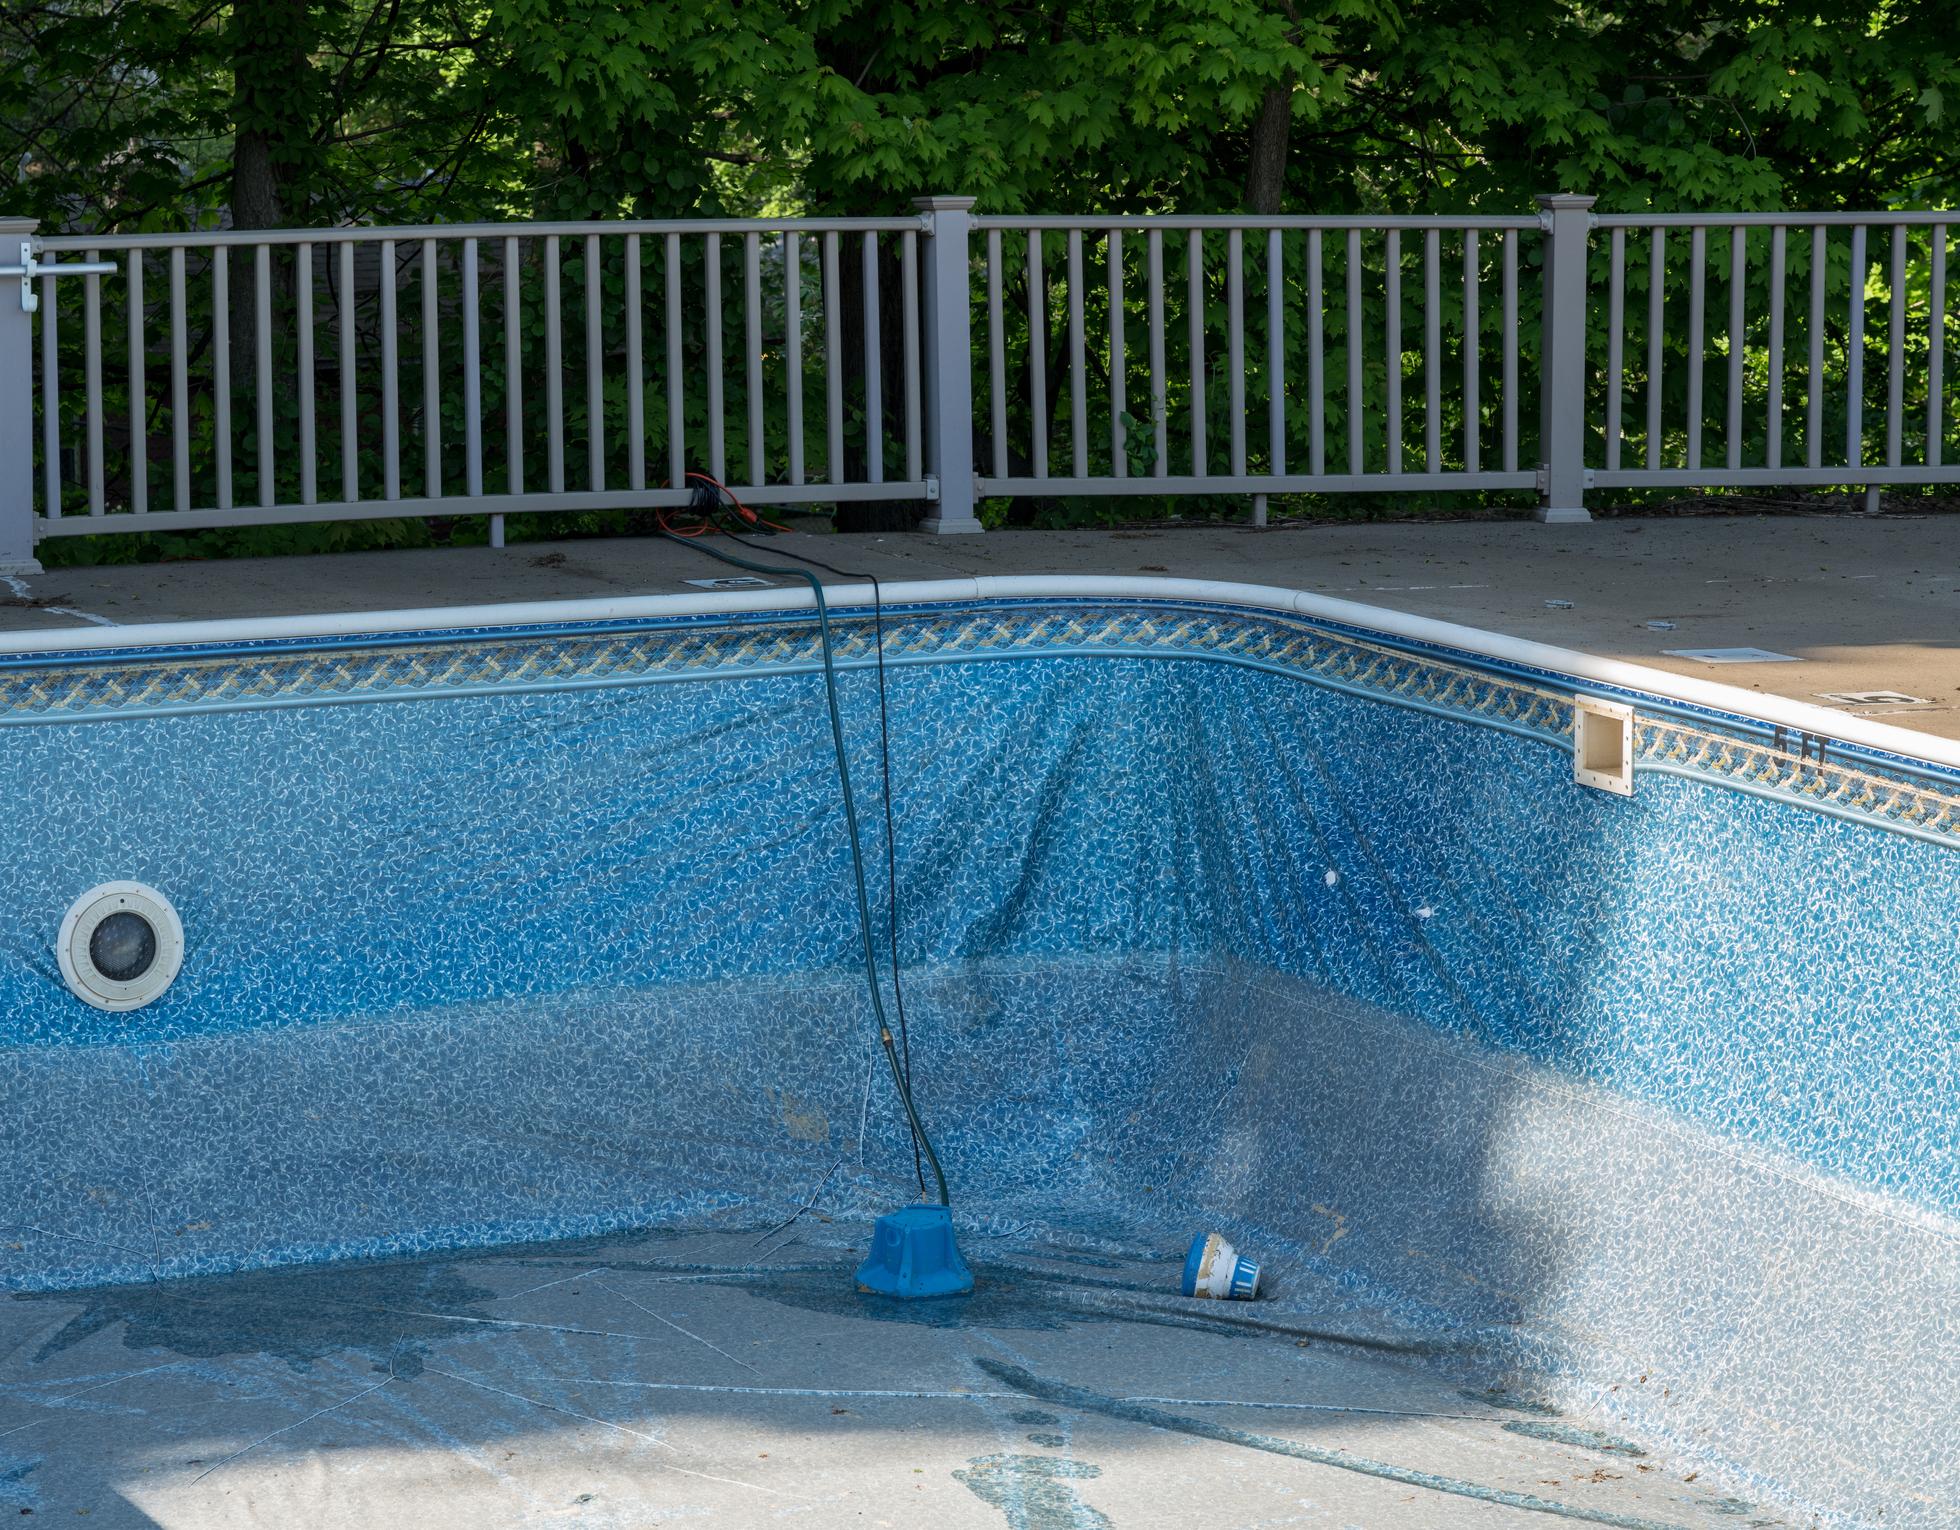 Can I Repair My Vinyl Pool Liner with a Pool Patch?